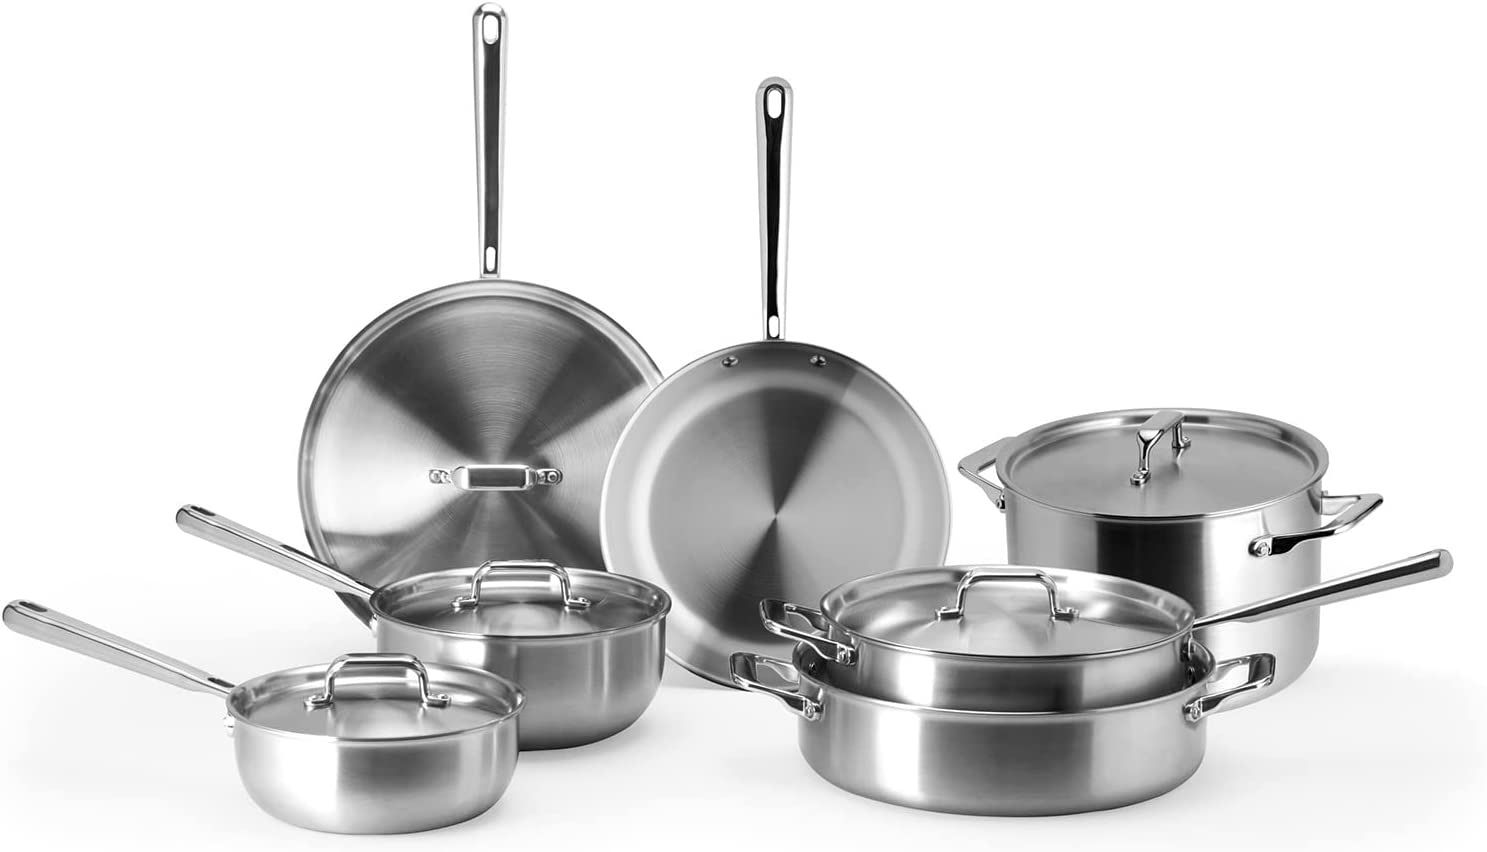 Misen Stainless Steel Pots and Pans Set - Stainless Steel Cookware Set - 12 Piece Complete Kitchen Cookware Sets